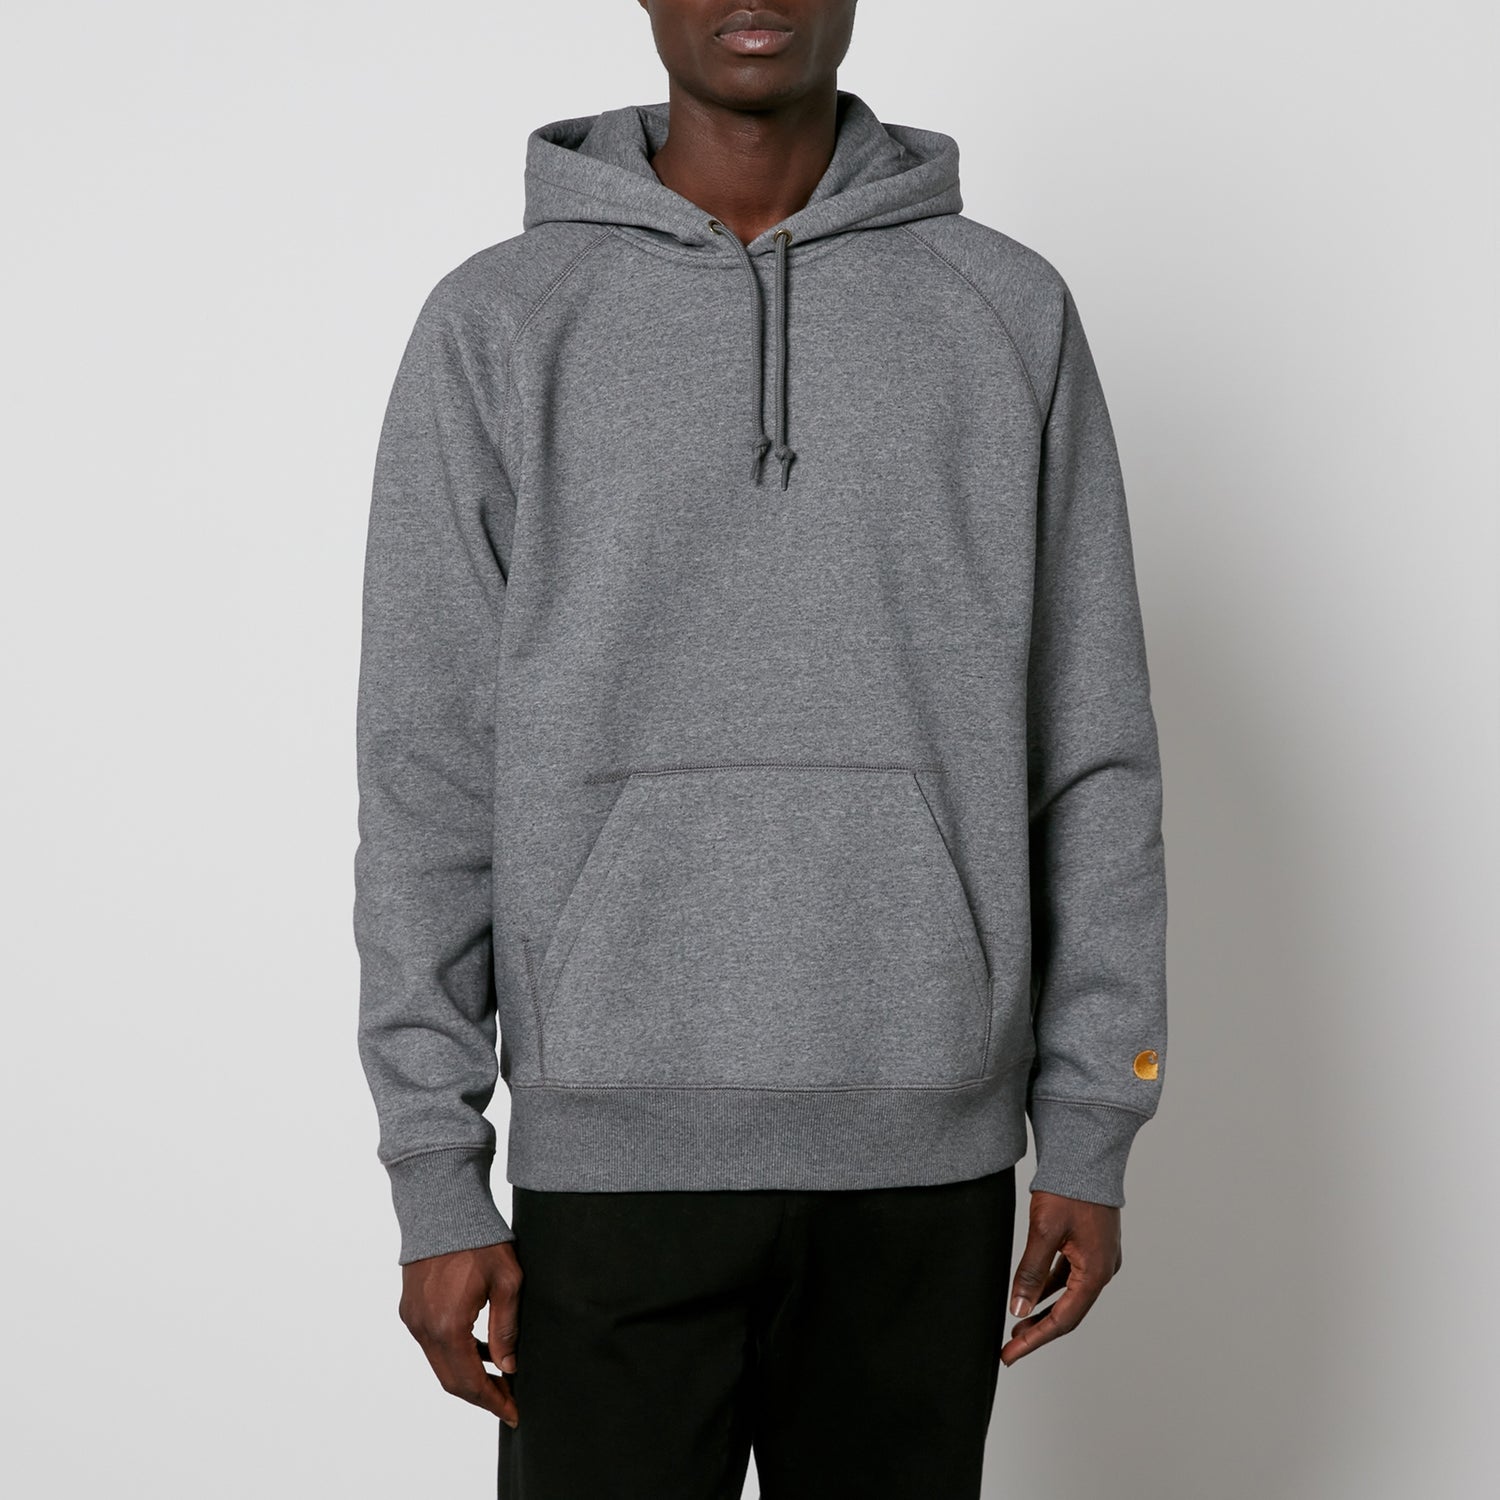 Carhartt WIP Chase Cotton-Blend Hoodie - M